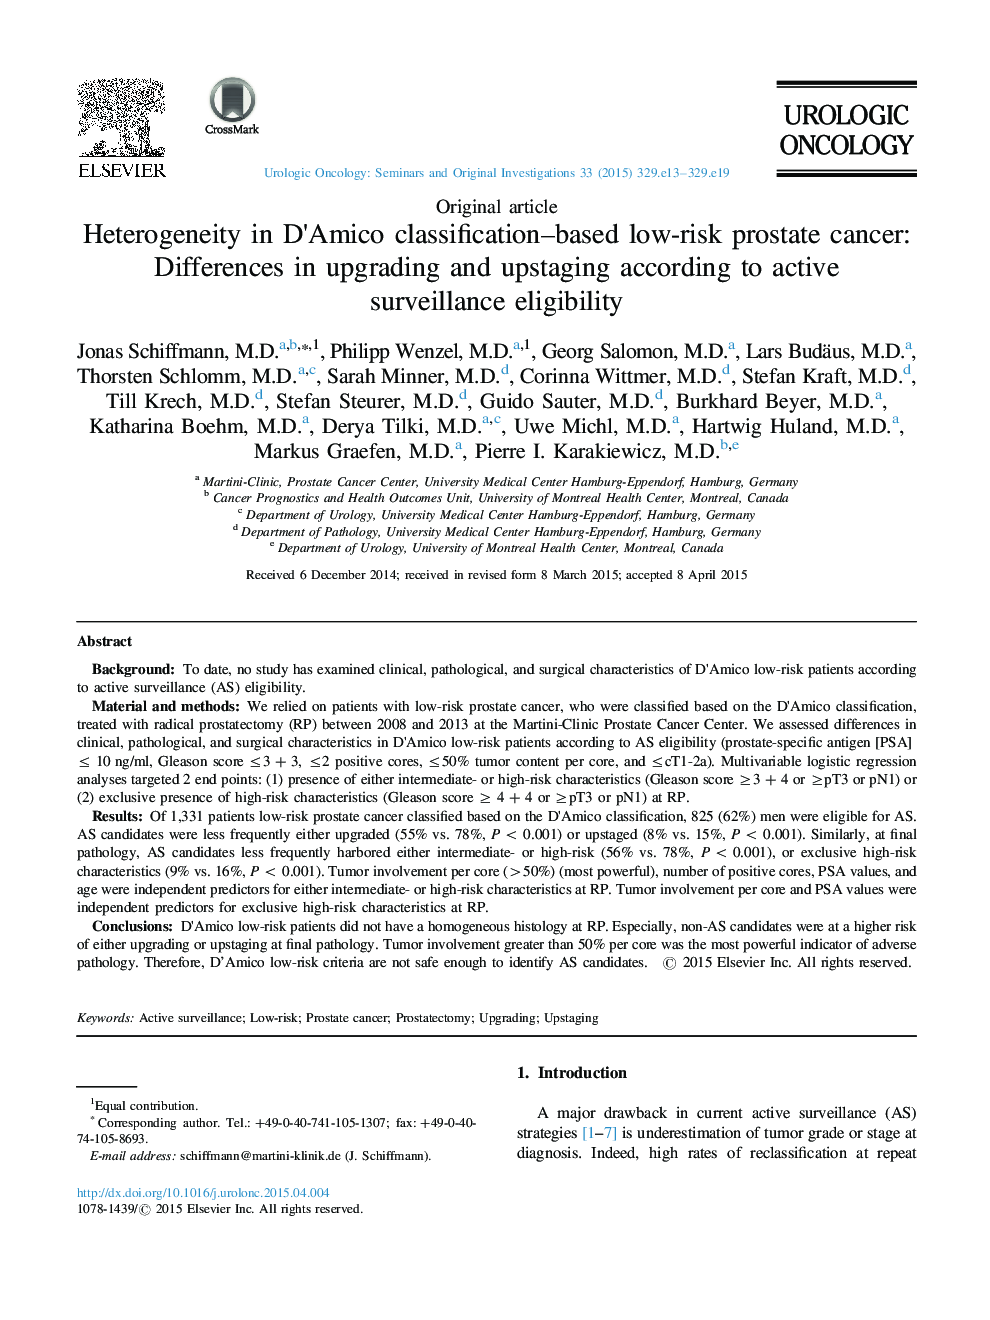 Heterogeneity in D×³Amico classification-based low-risk prostate cancer: Differences in upgrading and upstaging according to active surveillance eligibility